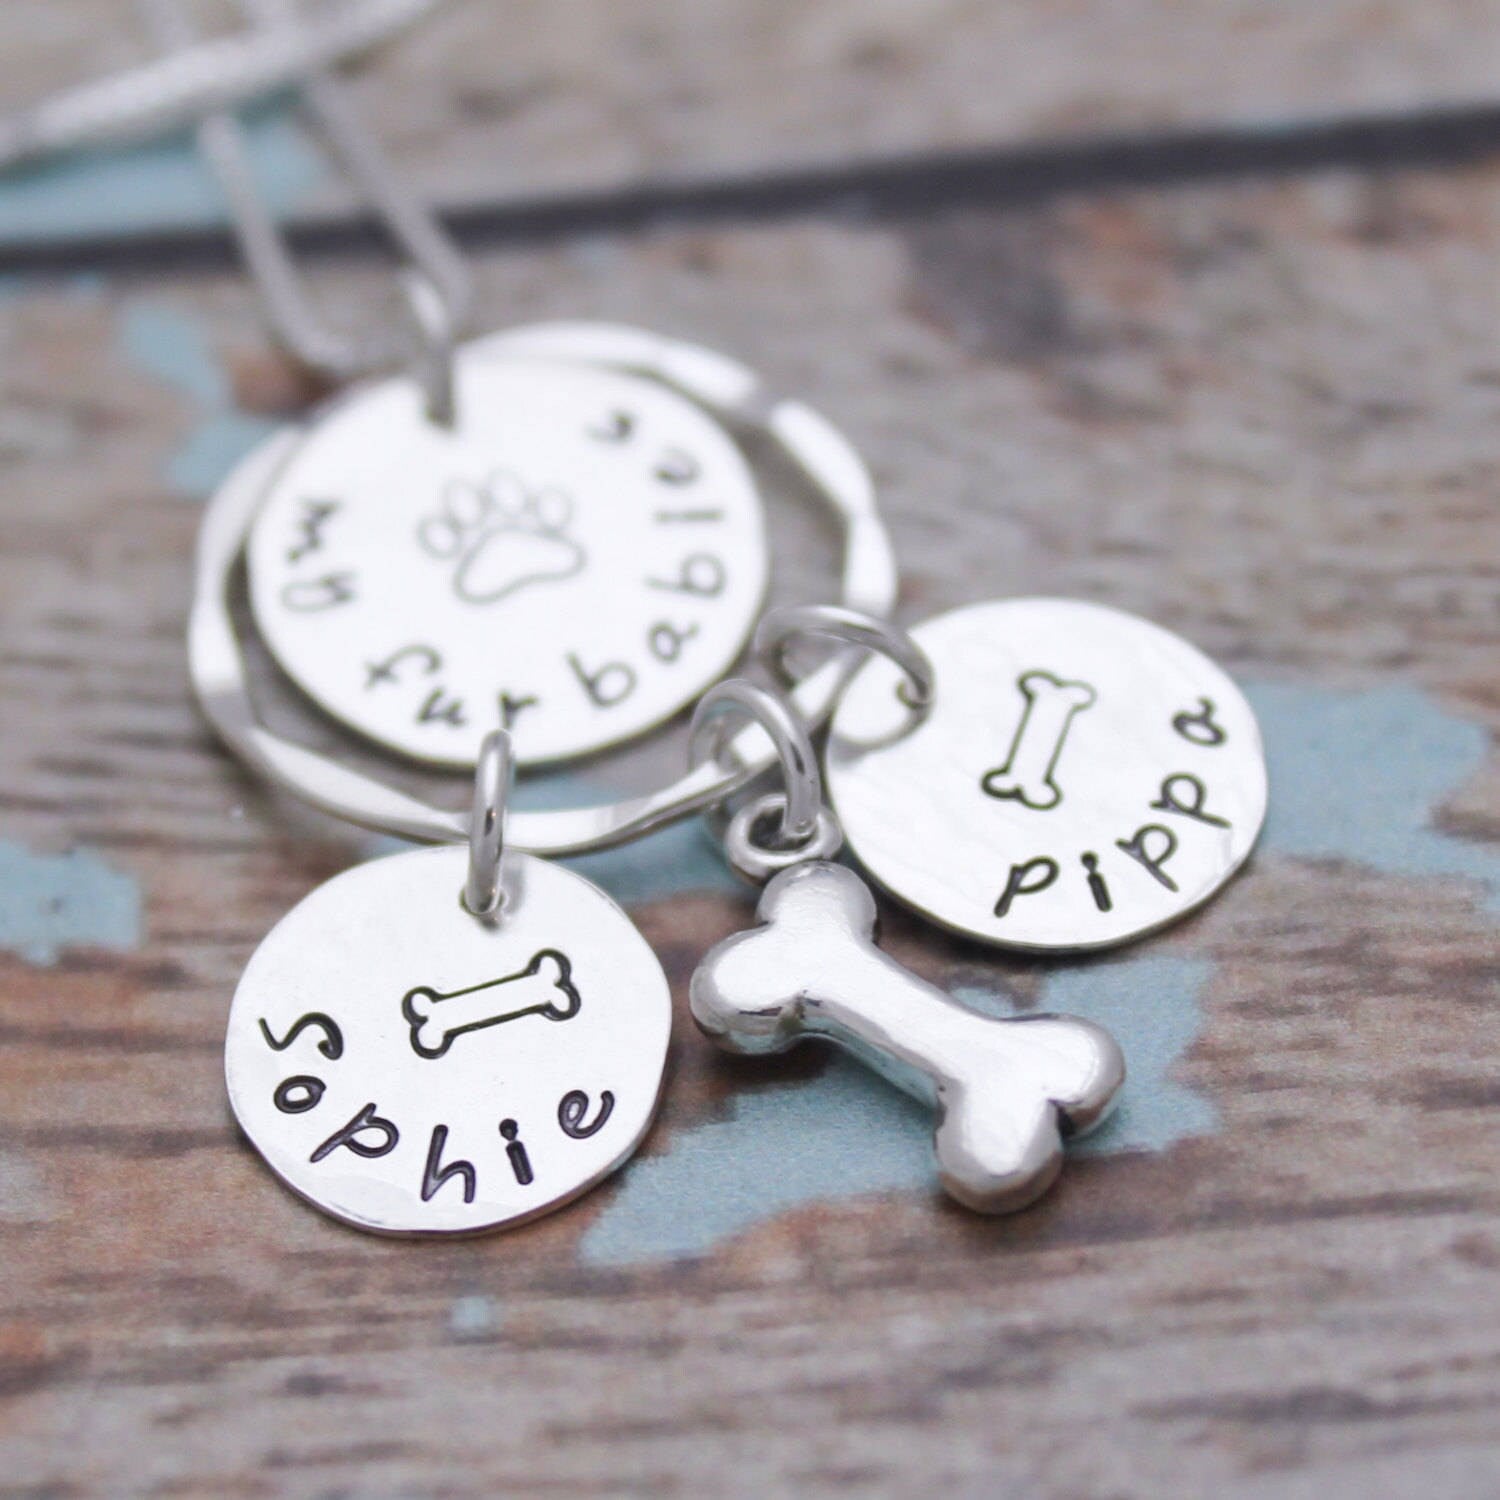 Personalized Dog Necklace, Love my Fur Babies Jewelry, Dog Lover Jewelry, Love my Dogs, Sterling Silver Personalized Necklace